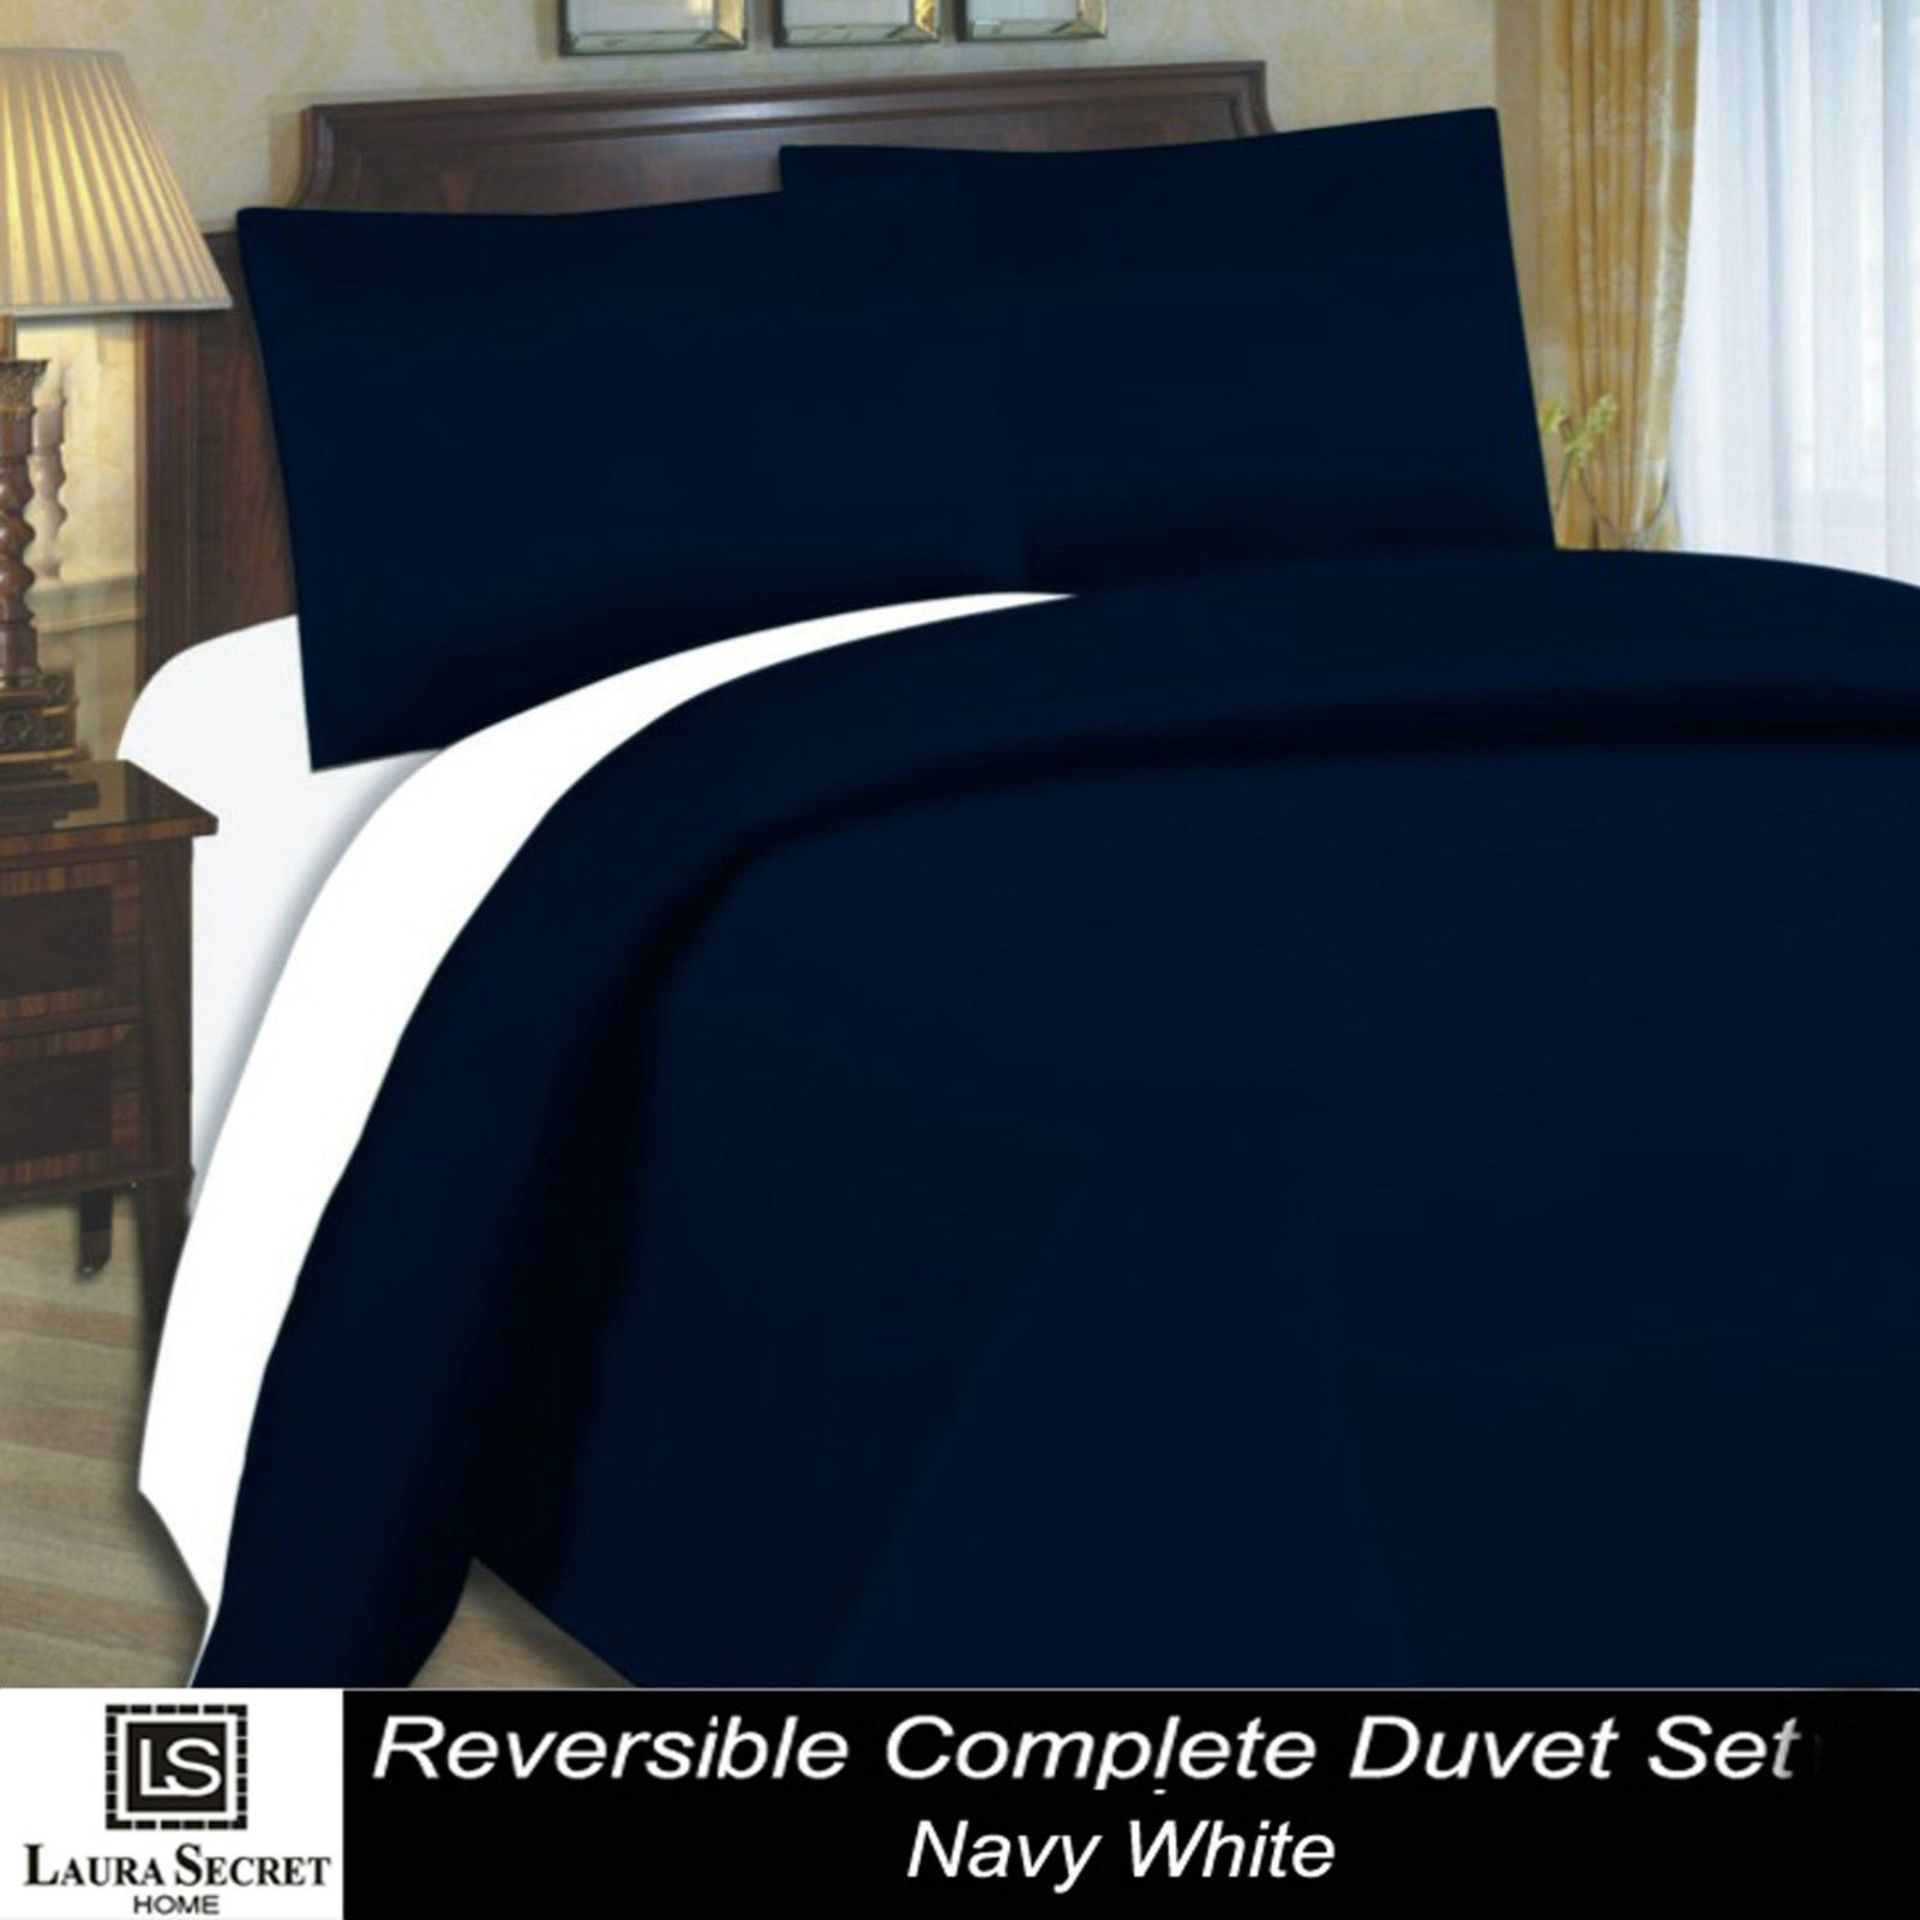 V *TRADE QTY* Brand New Complete 4 Piece Double Bed Set Reversible Navy and White - Includes - Duvet